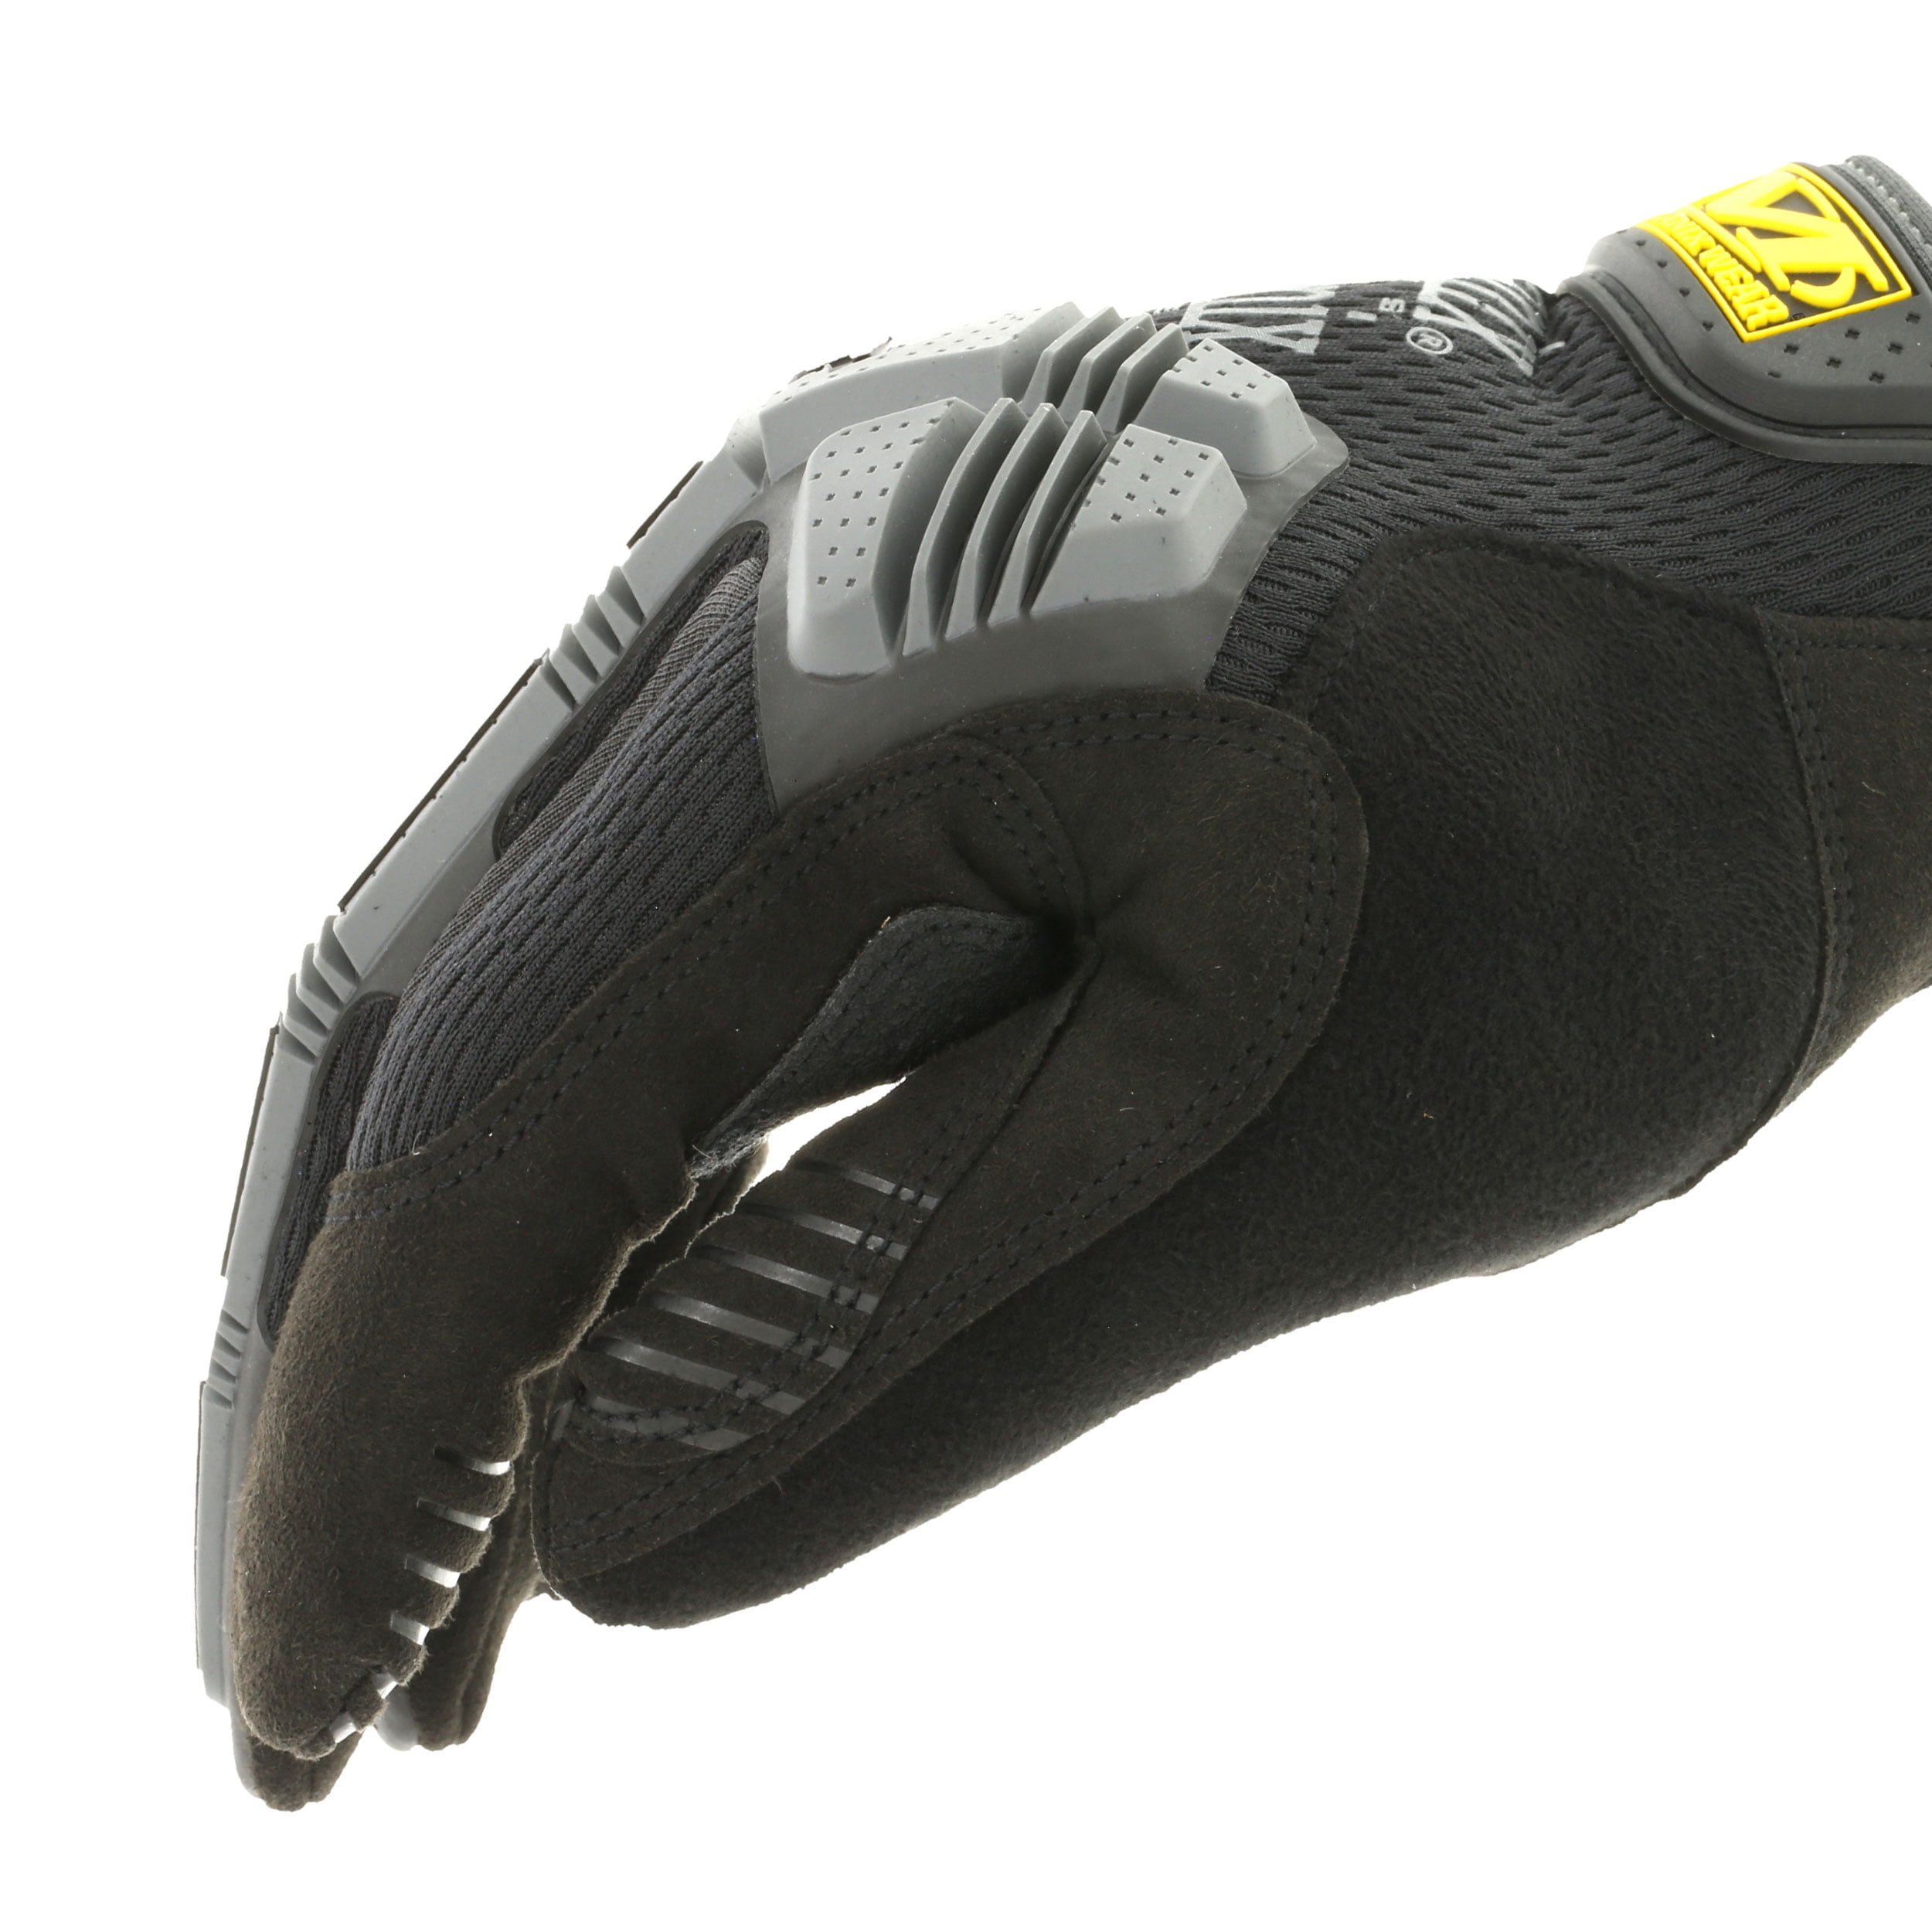 Mechanix Wear: M-Pact Covert Tactical Gloves with Secure Fit, Touchscreen  Capable Safety Gloves for Men, Work Gloves with Impact Protection and  Vibration Absorption (Black, Large) - Powersports Gloves 